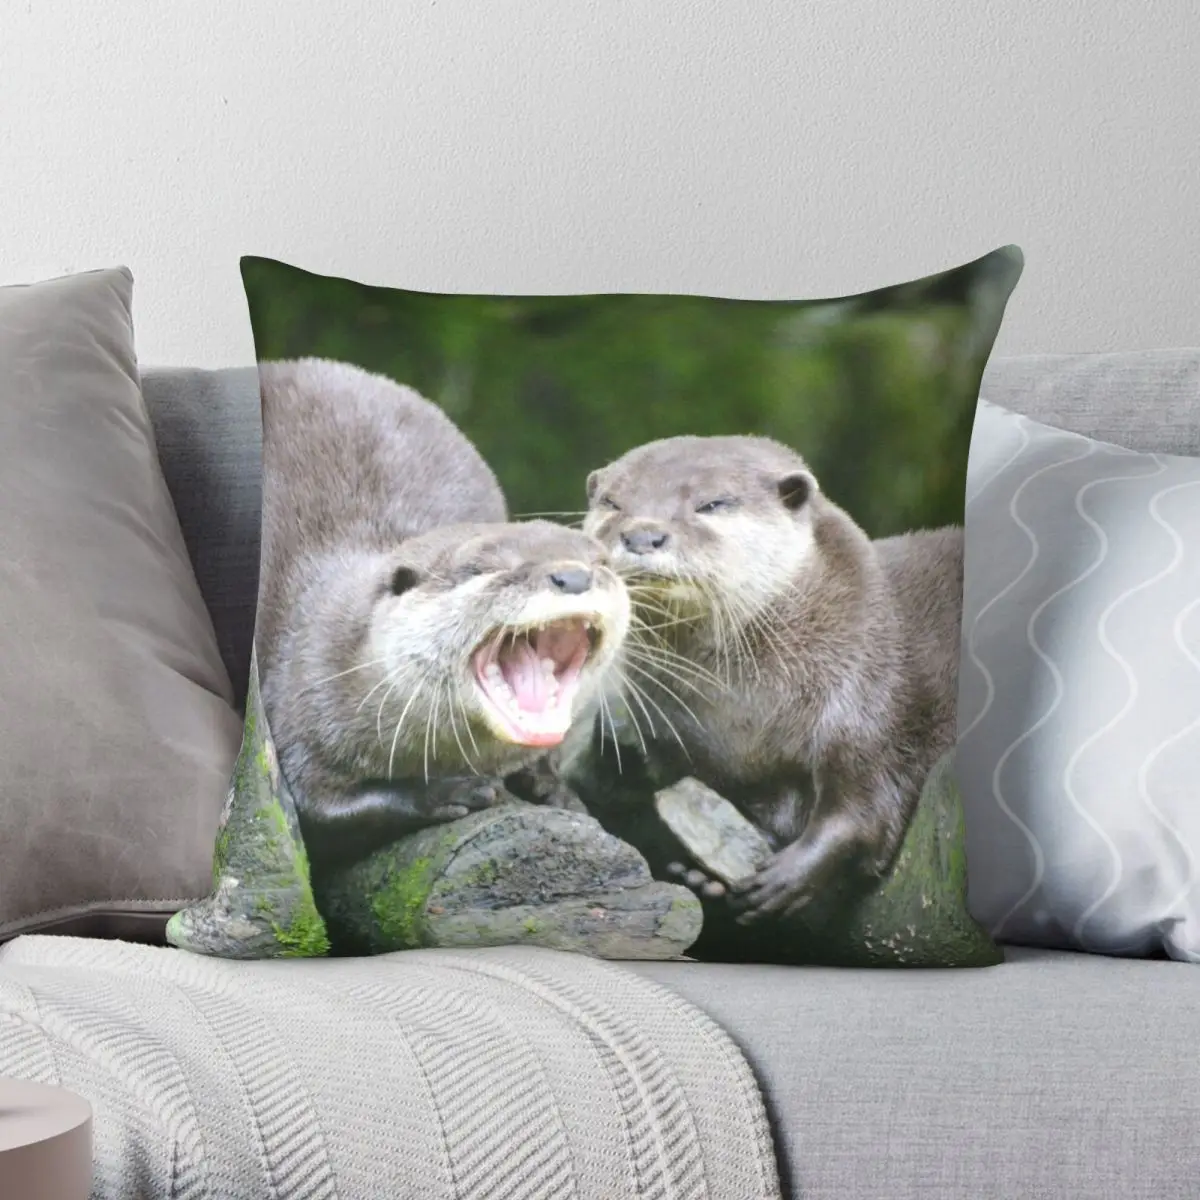 

Otters Yawning Square Pillowcase Polyester Linen Velvet Printed Zip Decor Throw Pillow Case Home Cushion Case